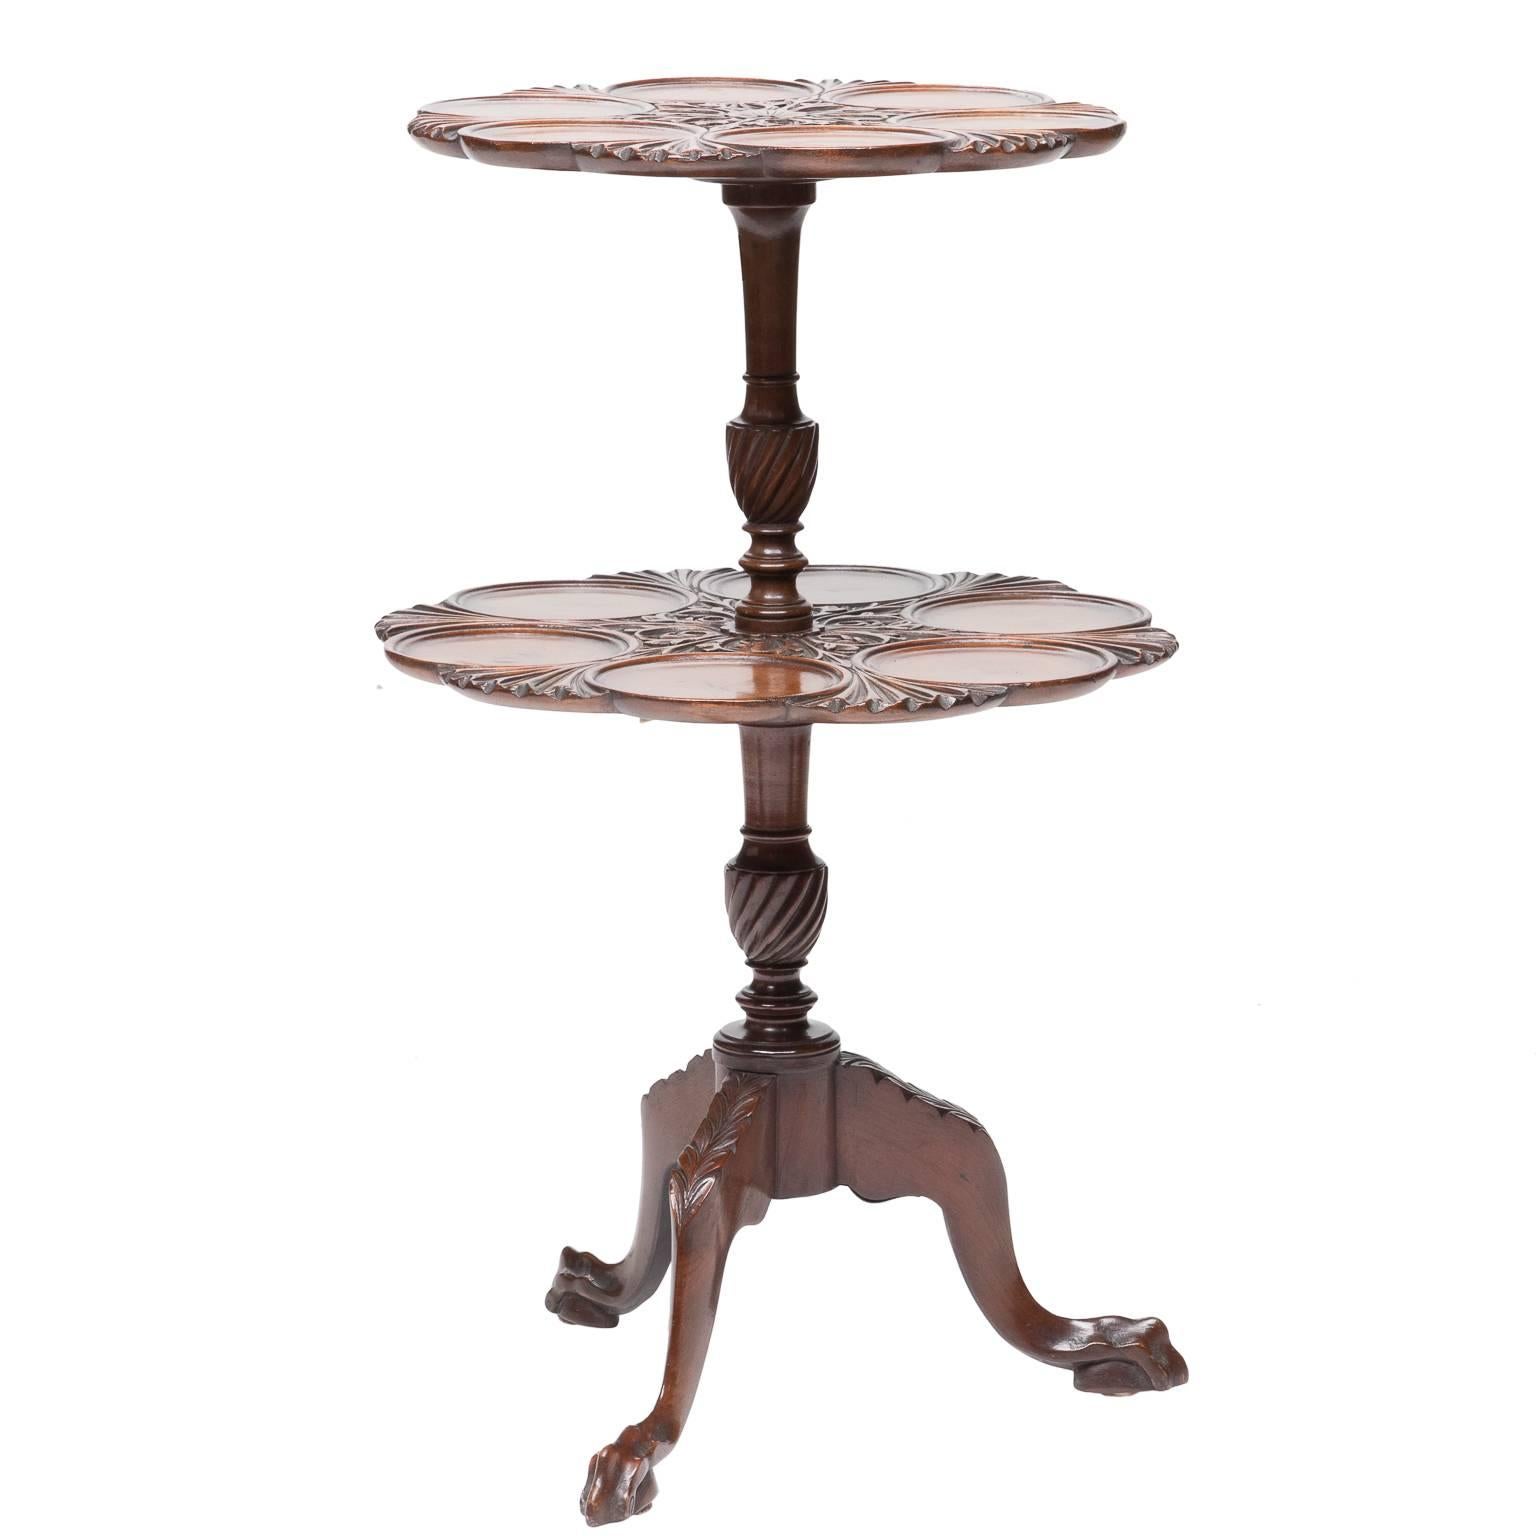 Chippendale 19th Century English Two-Tier Dessert Table